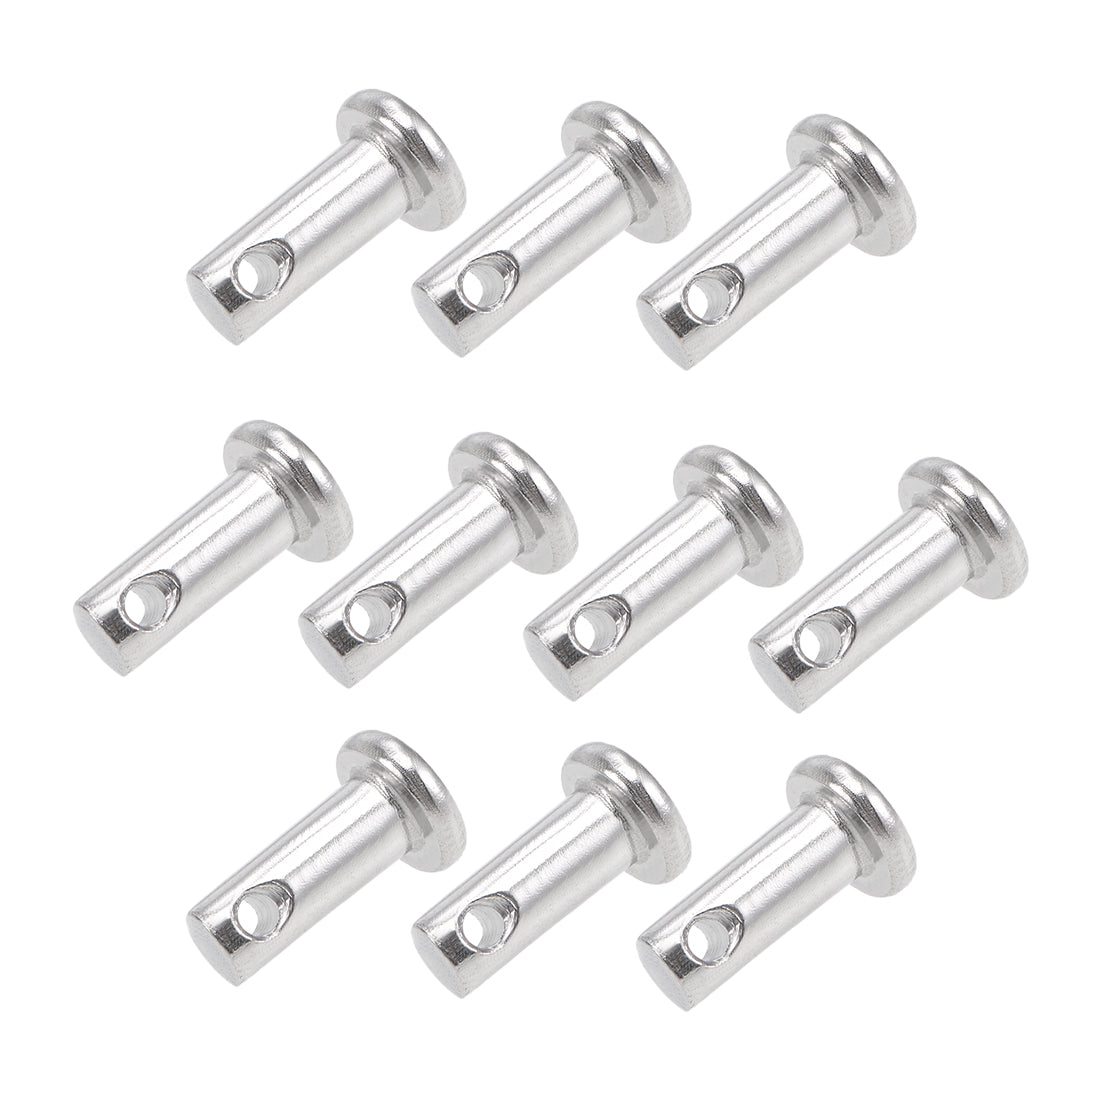 uxcell Uxcell Single Hole Clevis Pins - 4mm x 10mm Flat Head 304 Stainless Steel Link Hinge Pin 10Pcs